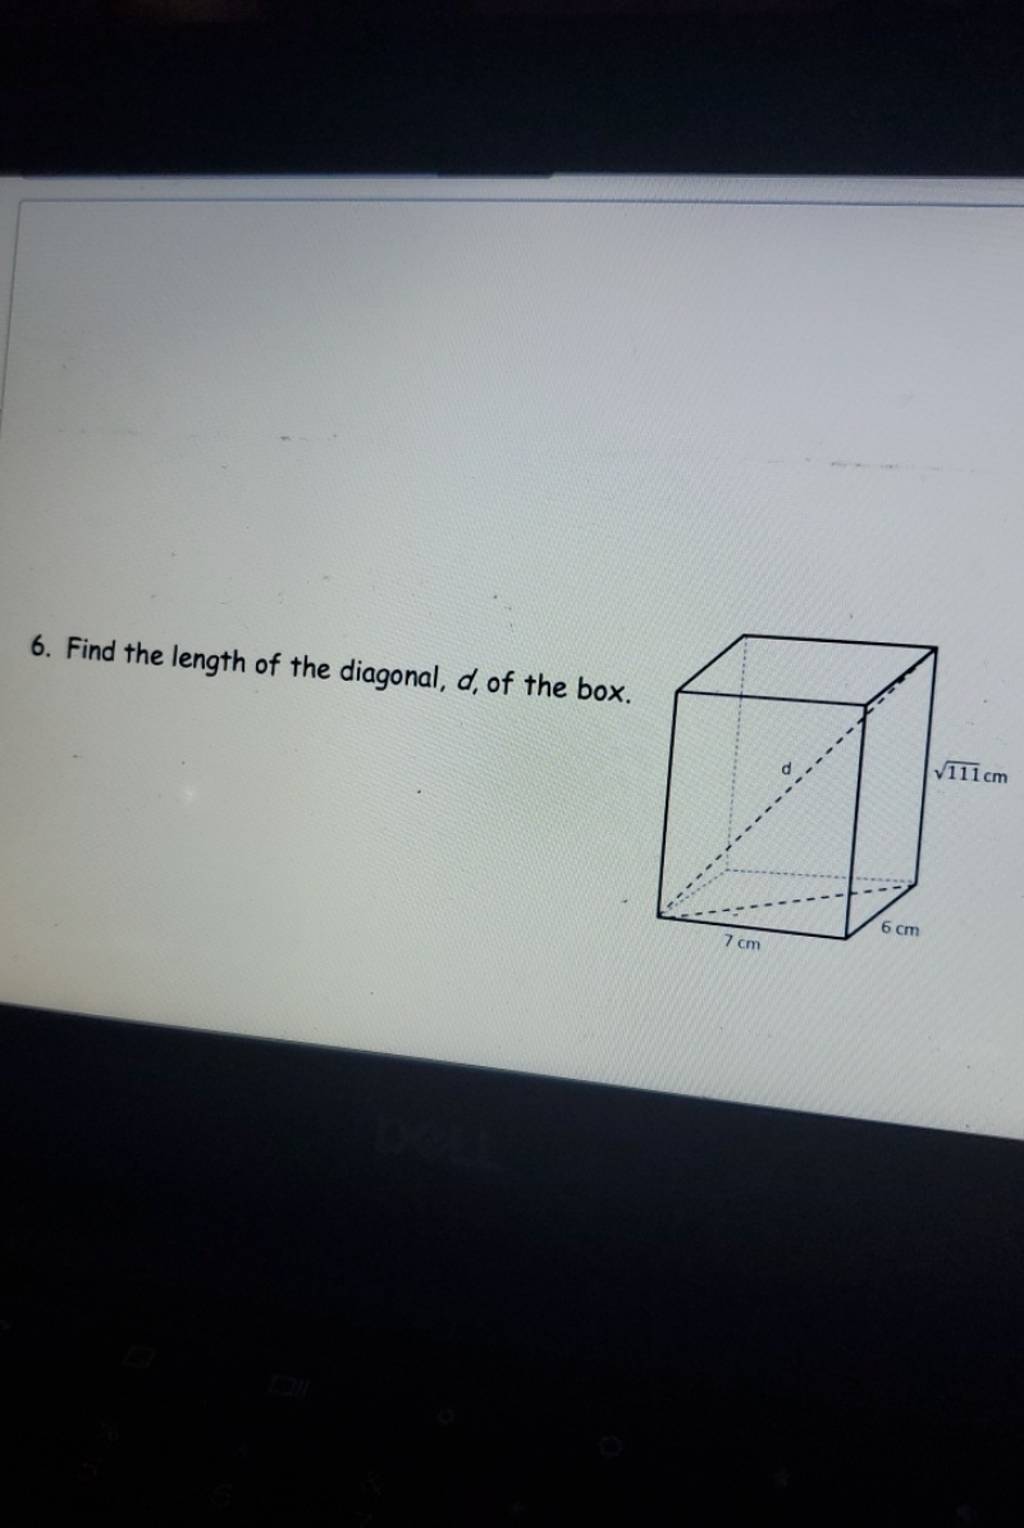 6. Find the length of the diagonal, d, of the box.
